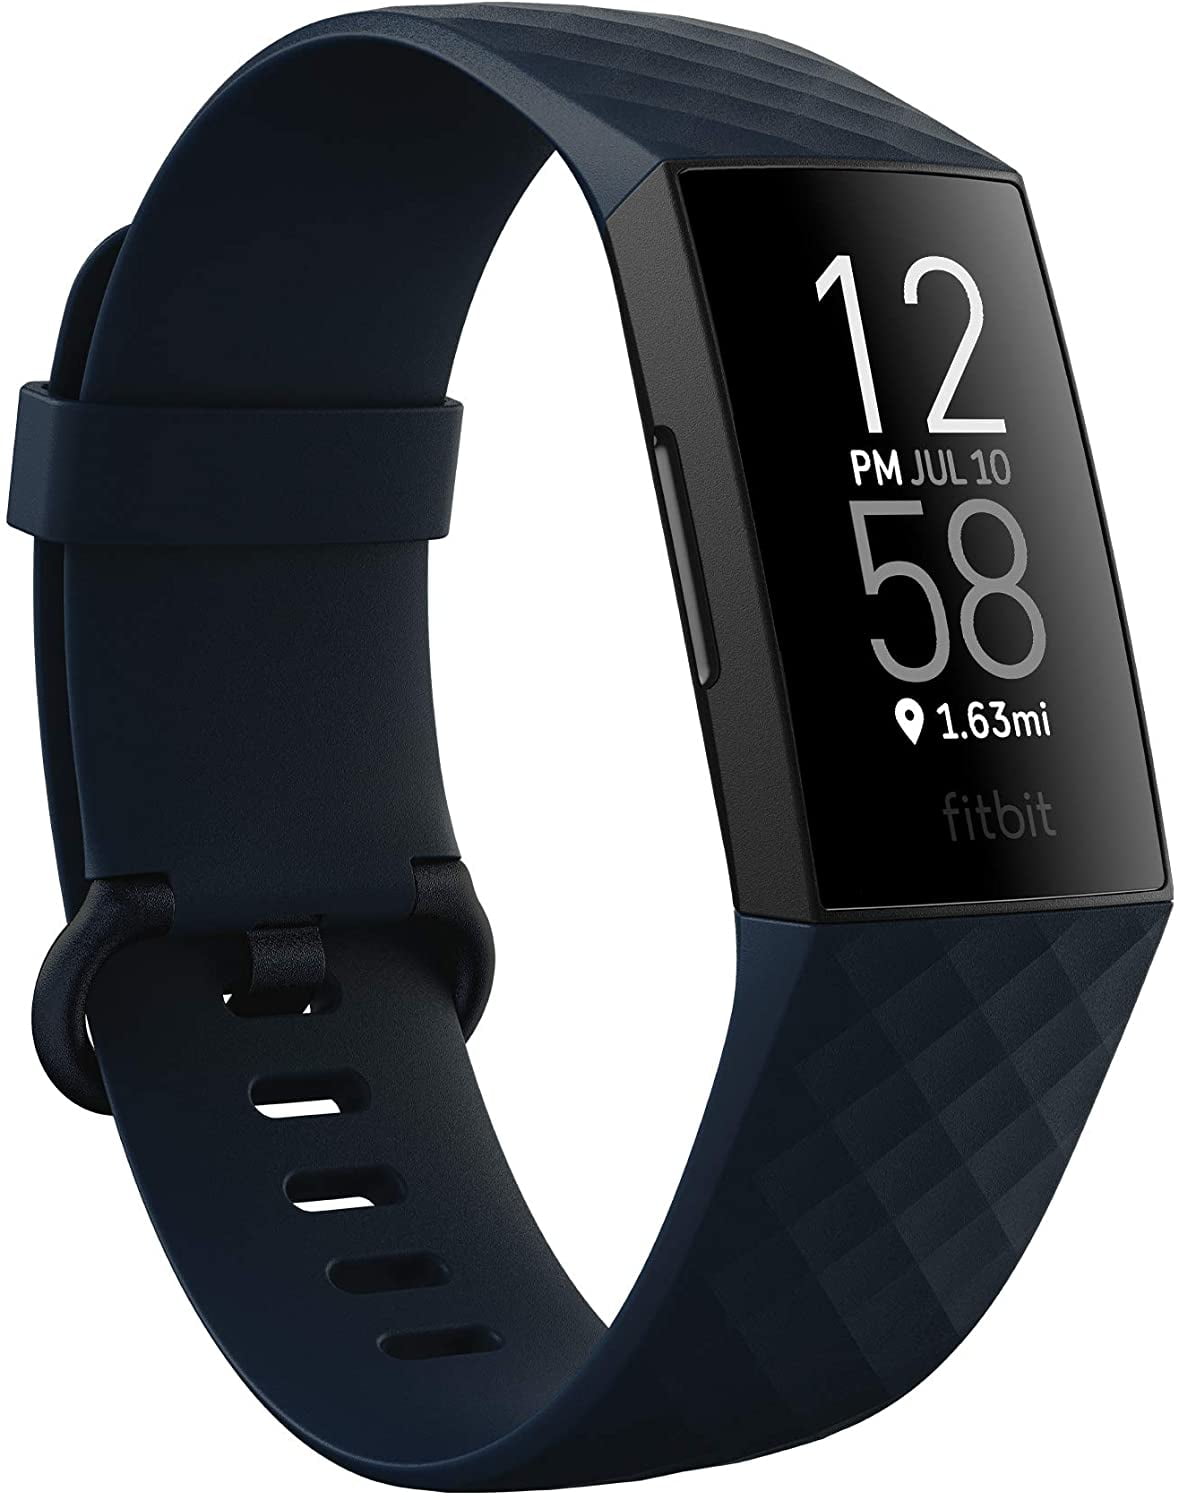 which fitbit monitors heart rate